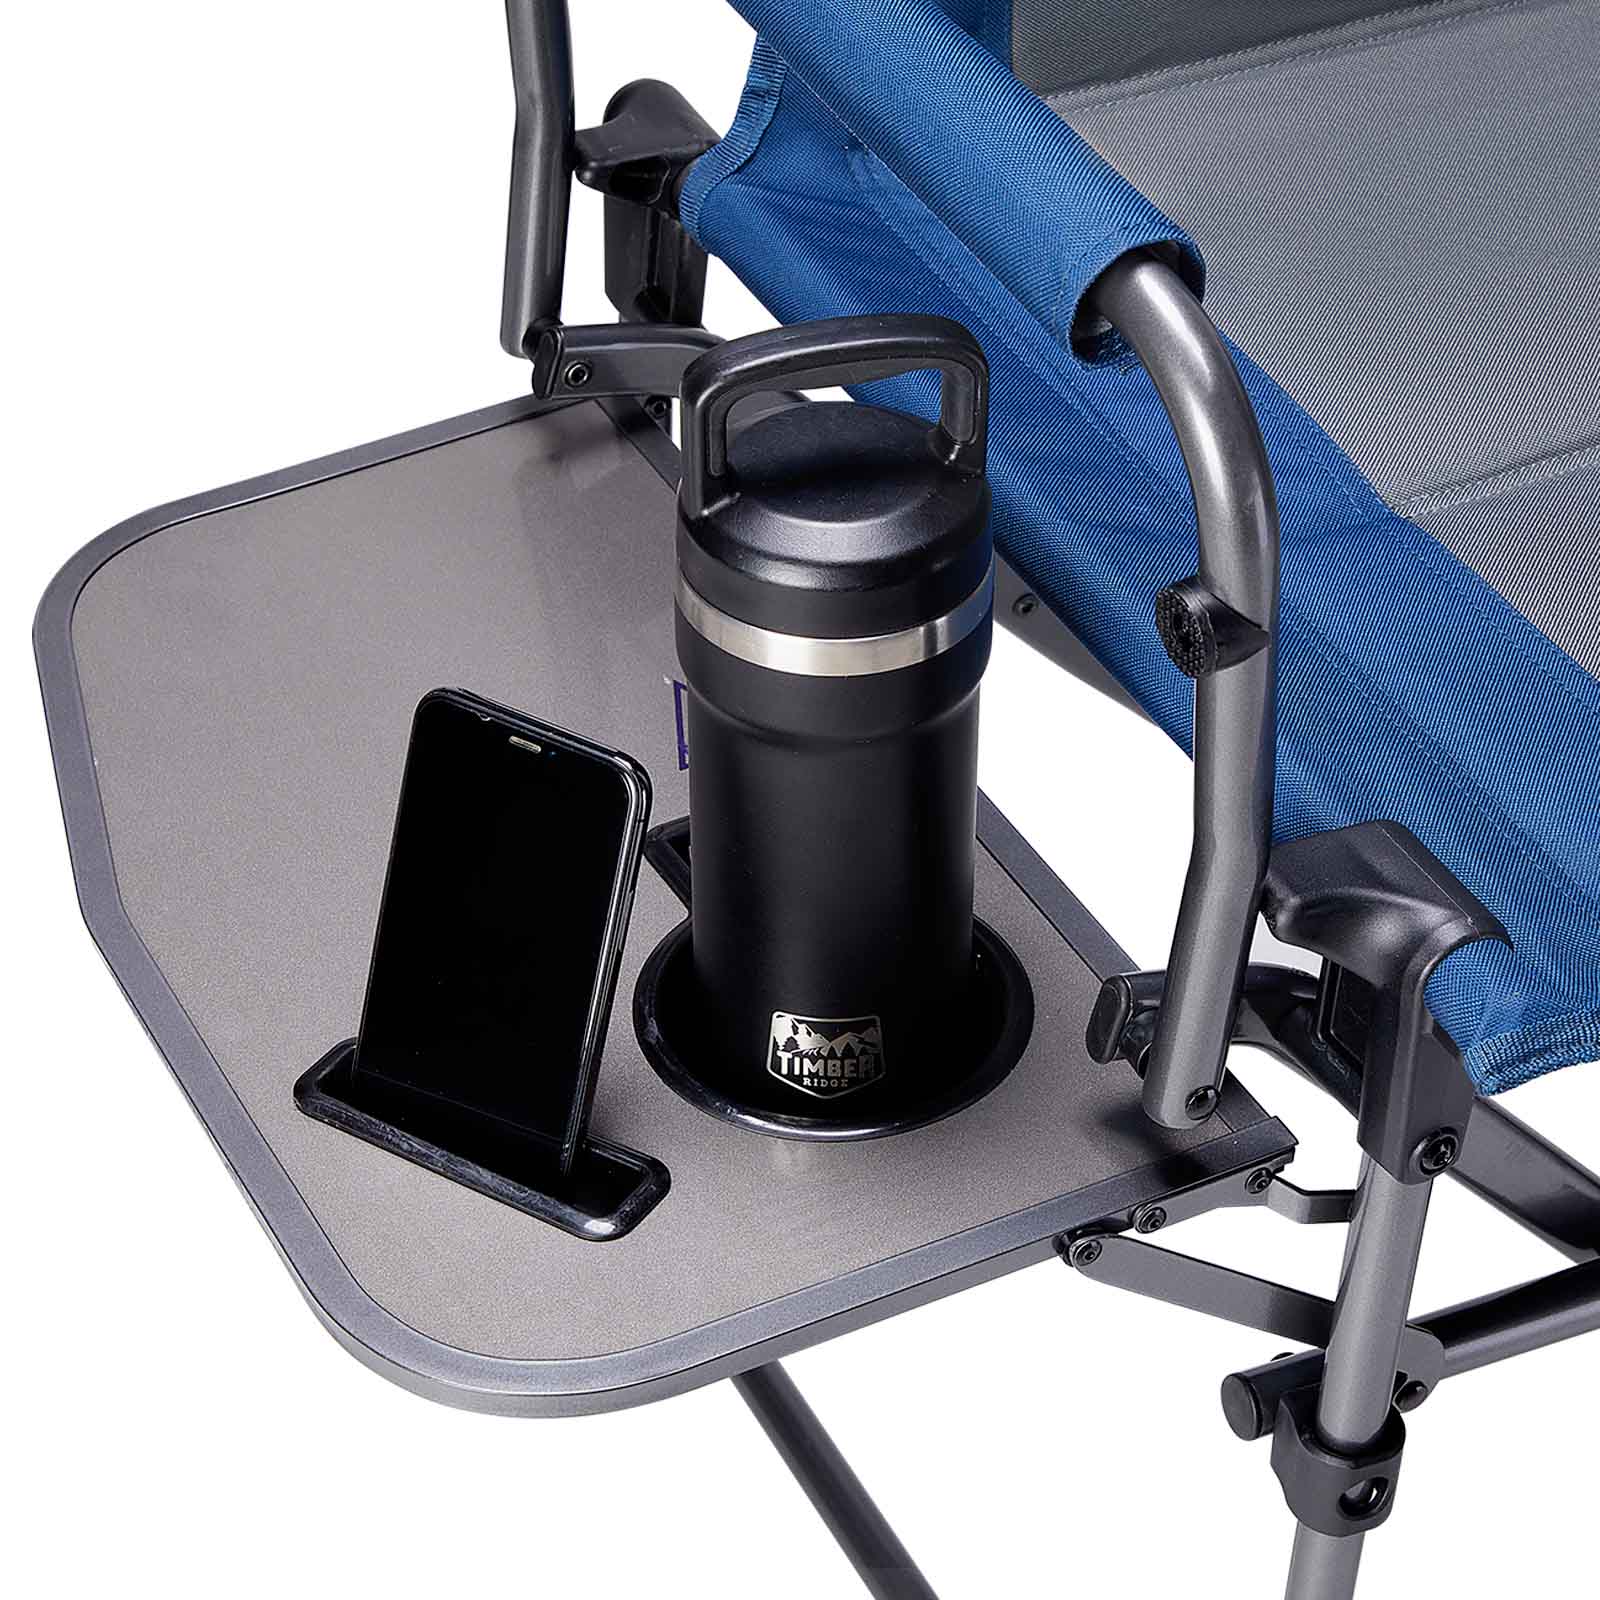 Compact Camping Directors Chair